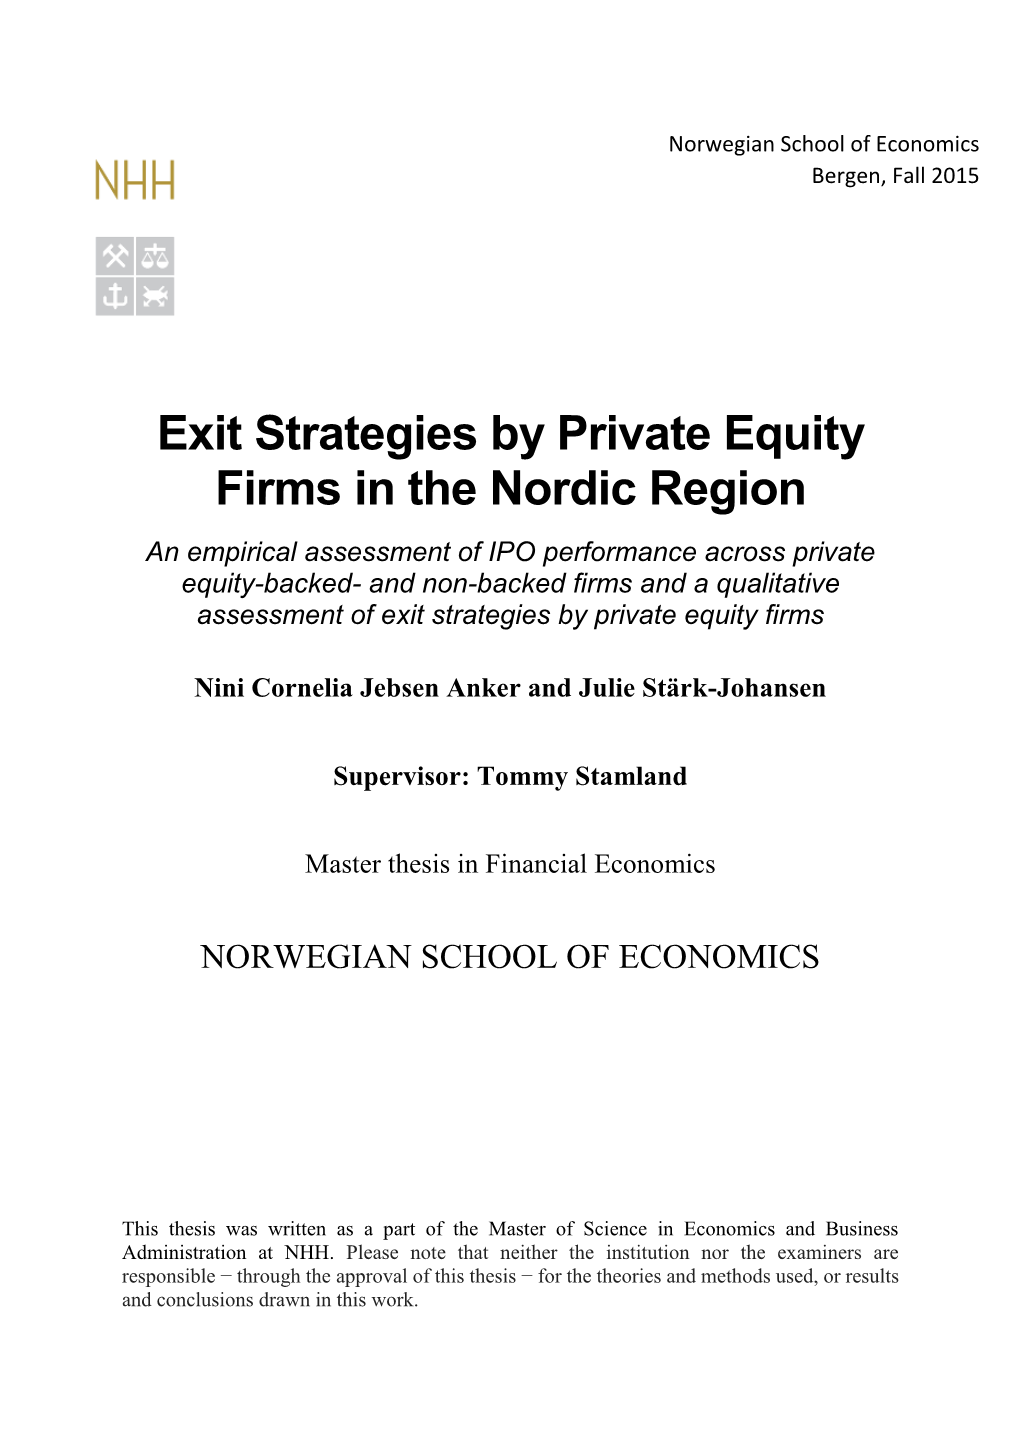 Exit Strategies by Private Equity Firms in the Nordic Region